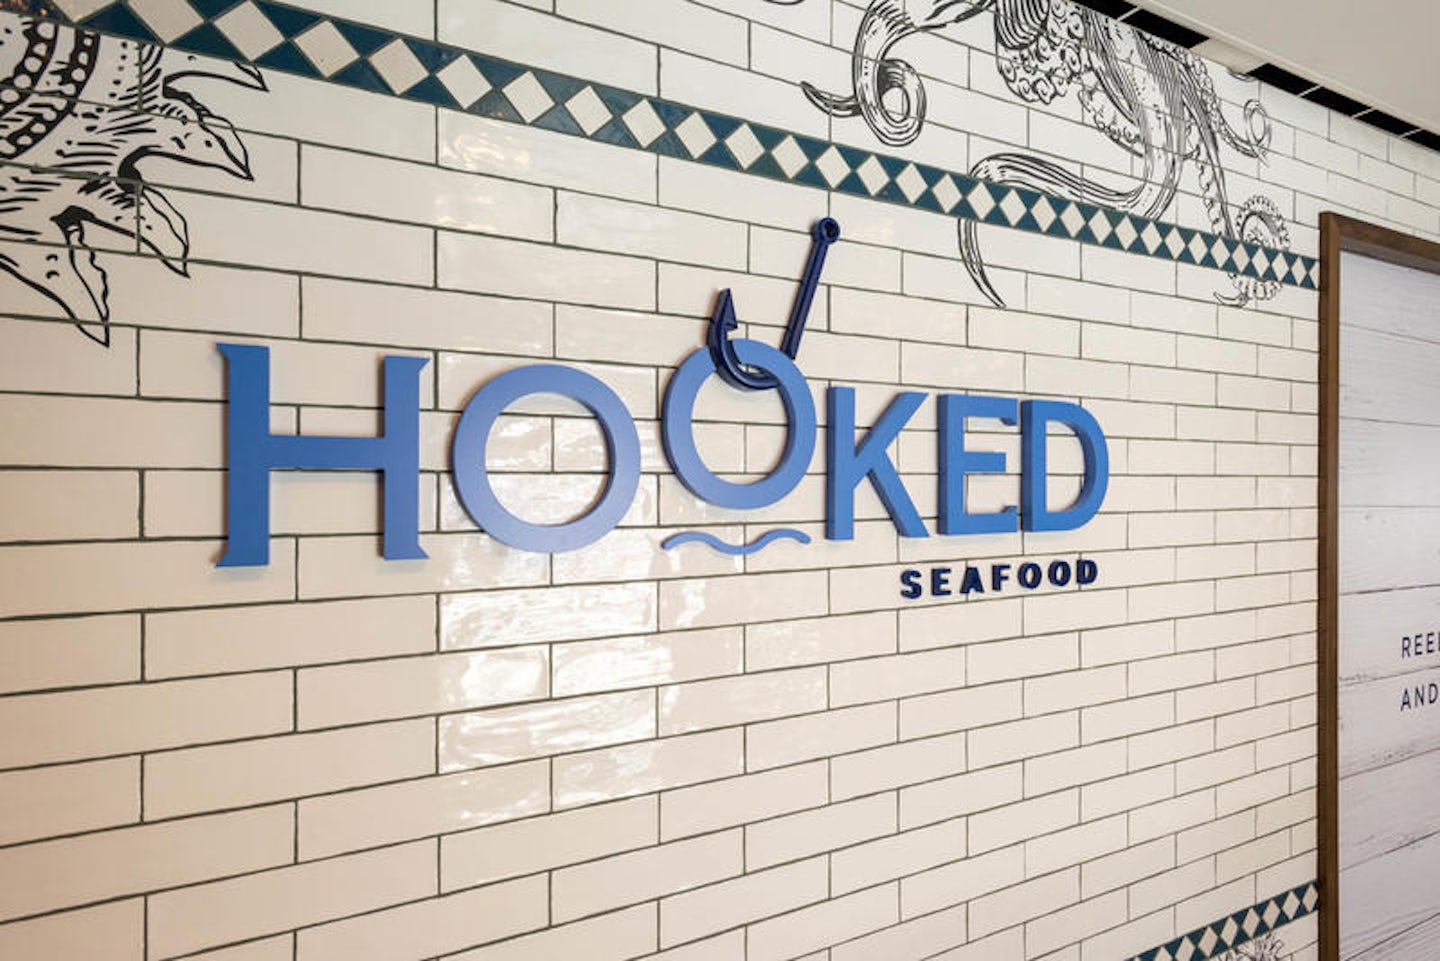 Hooked Seafood on Symphony of the Seas